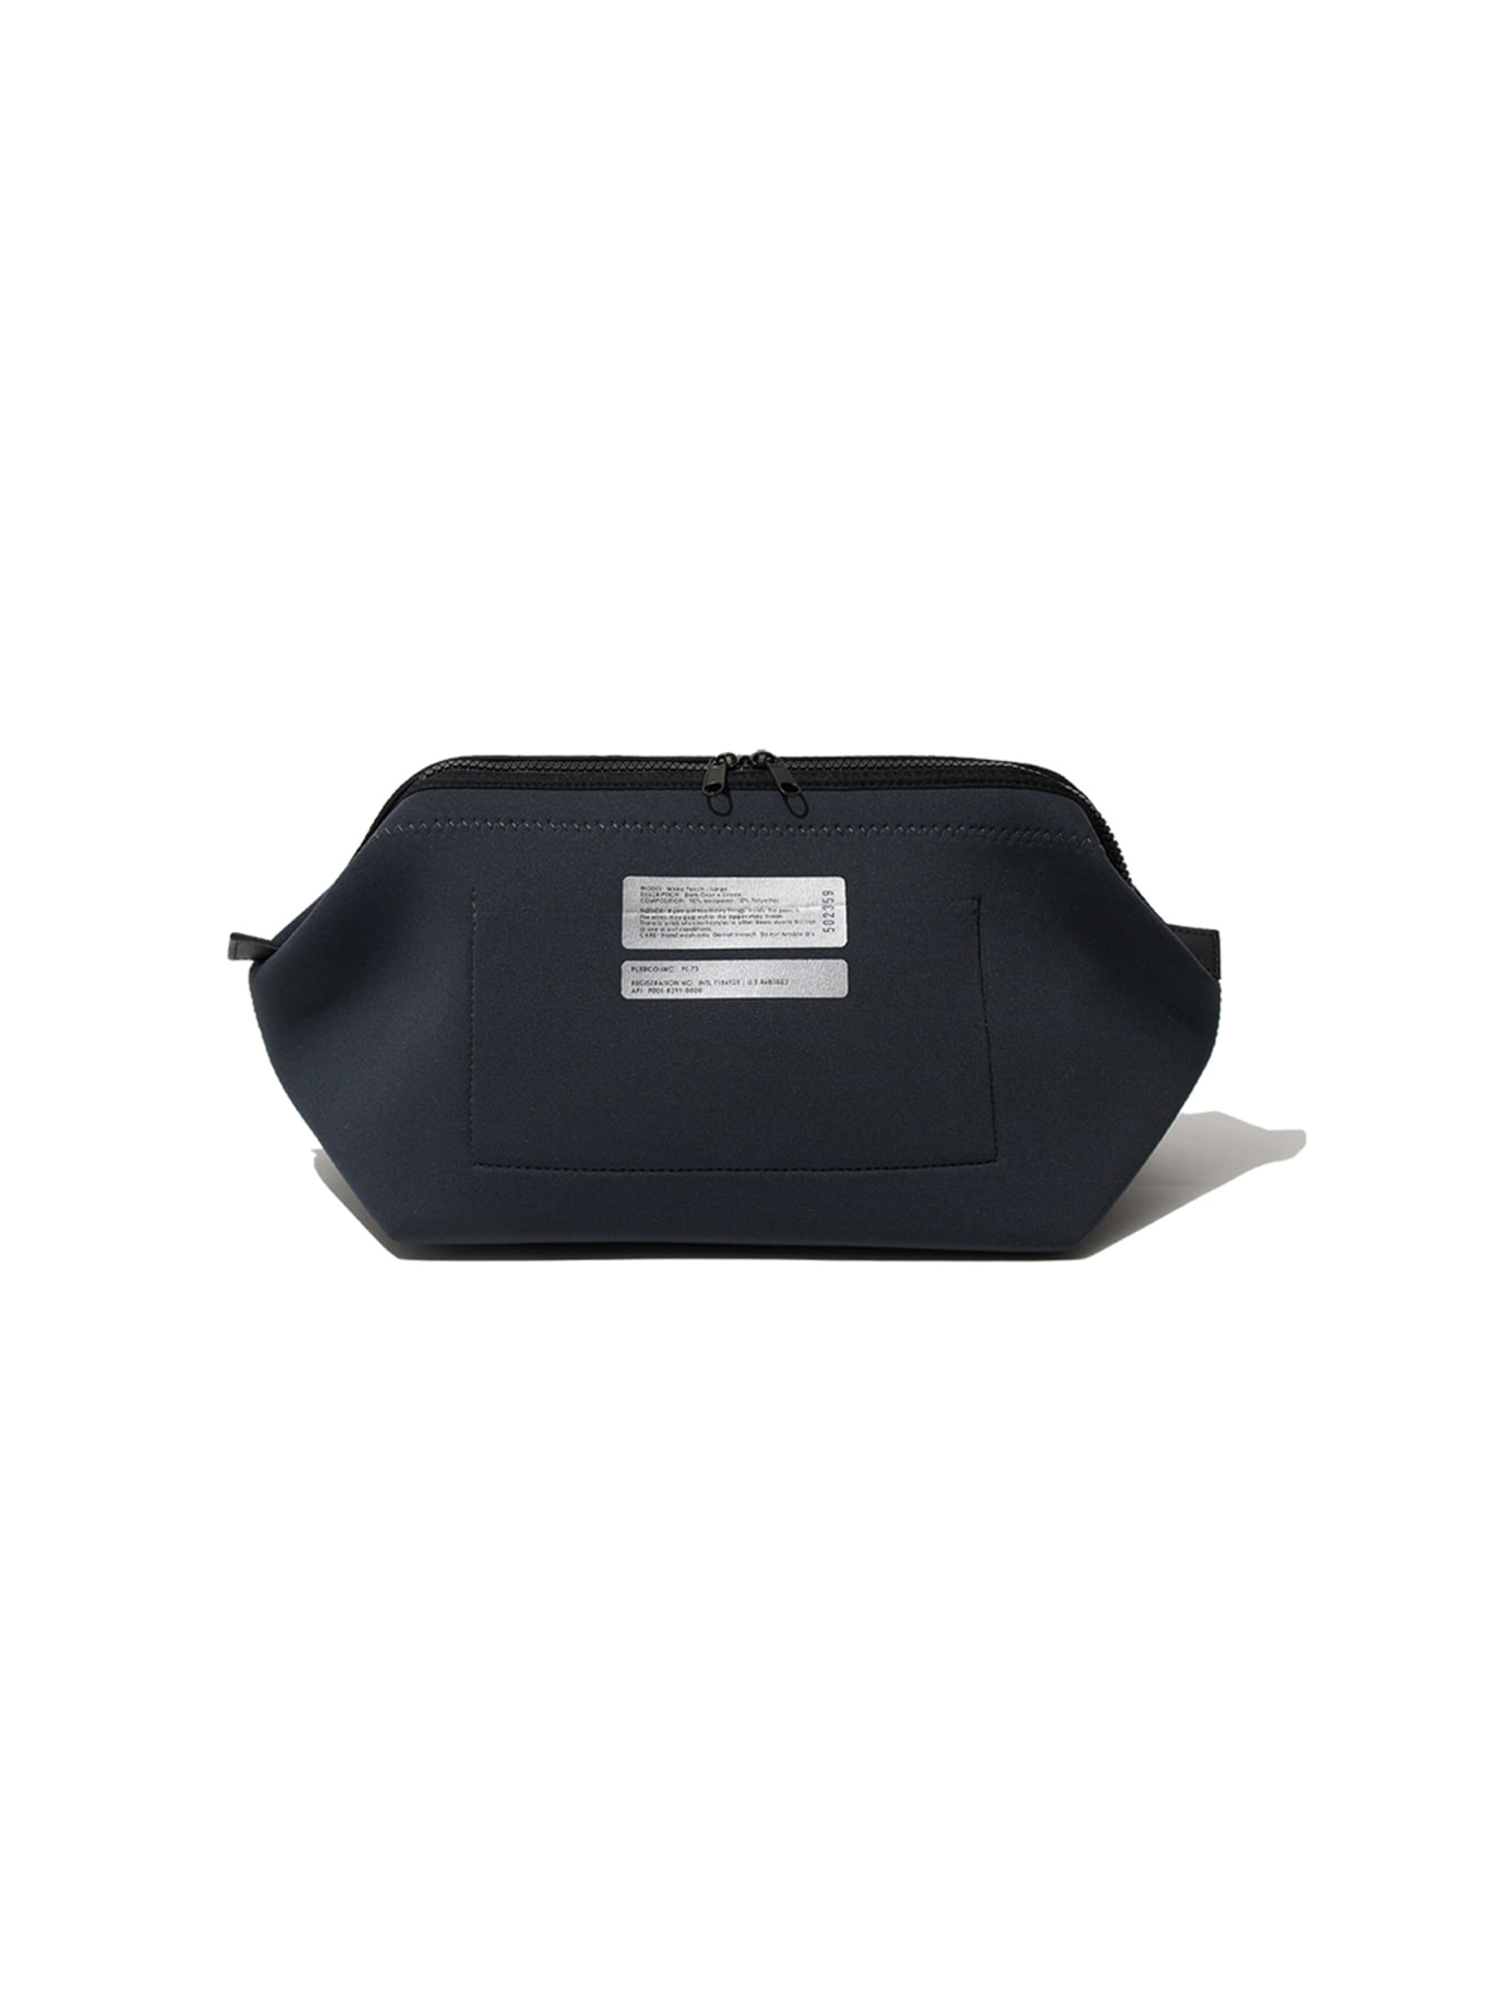 WIRED POUCH SMALL (DARK GRAY)